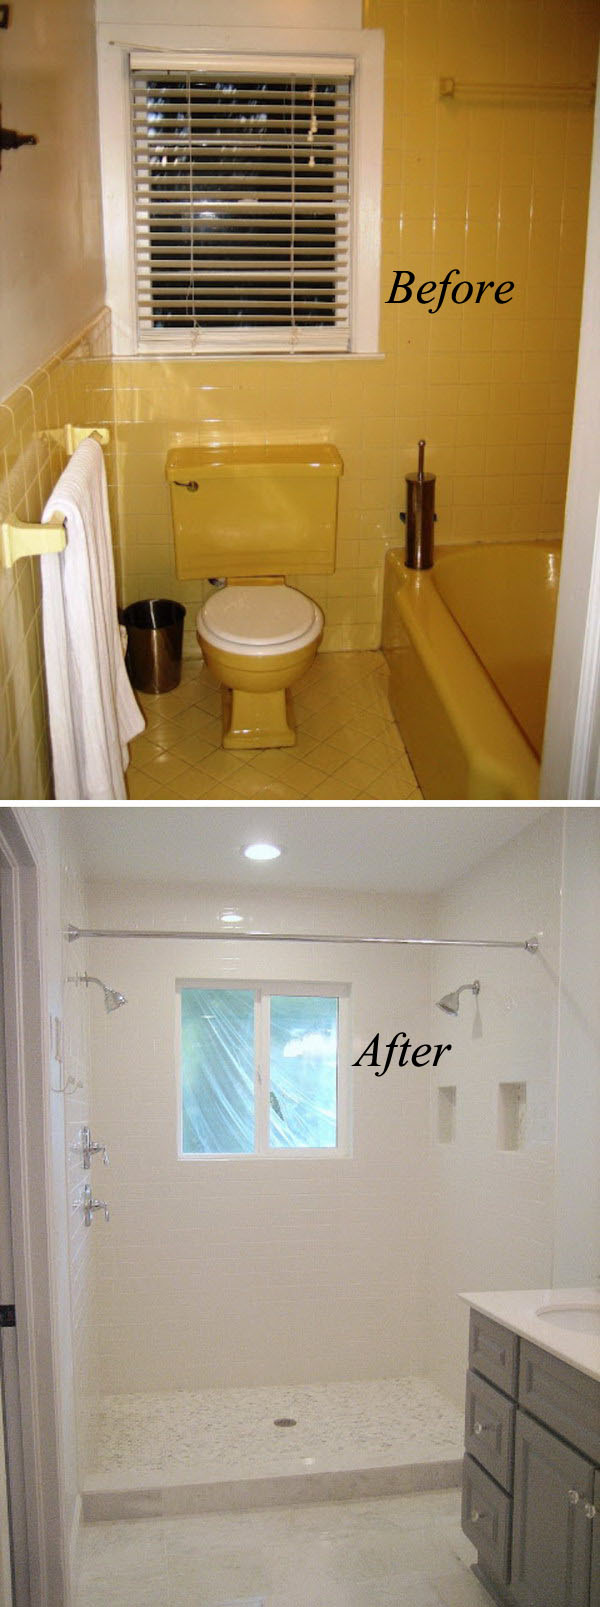 Before and After: 20+ Awesome Bathroom Makeovers - Hative